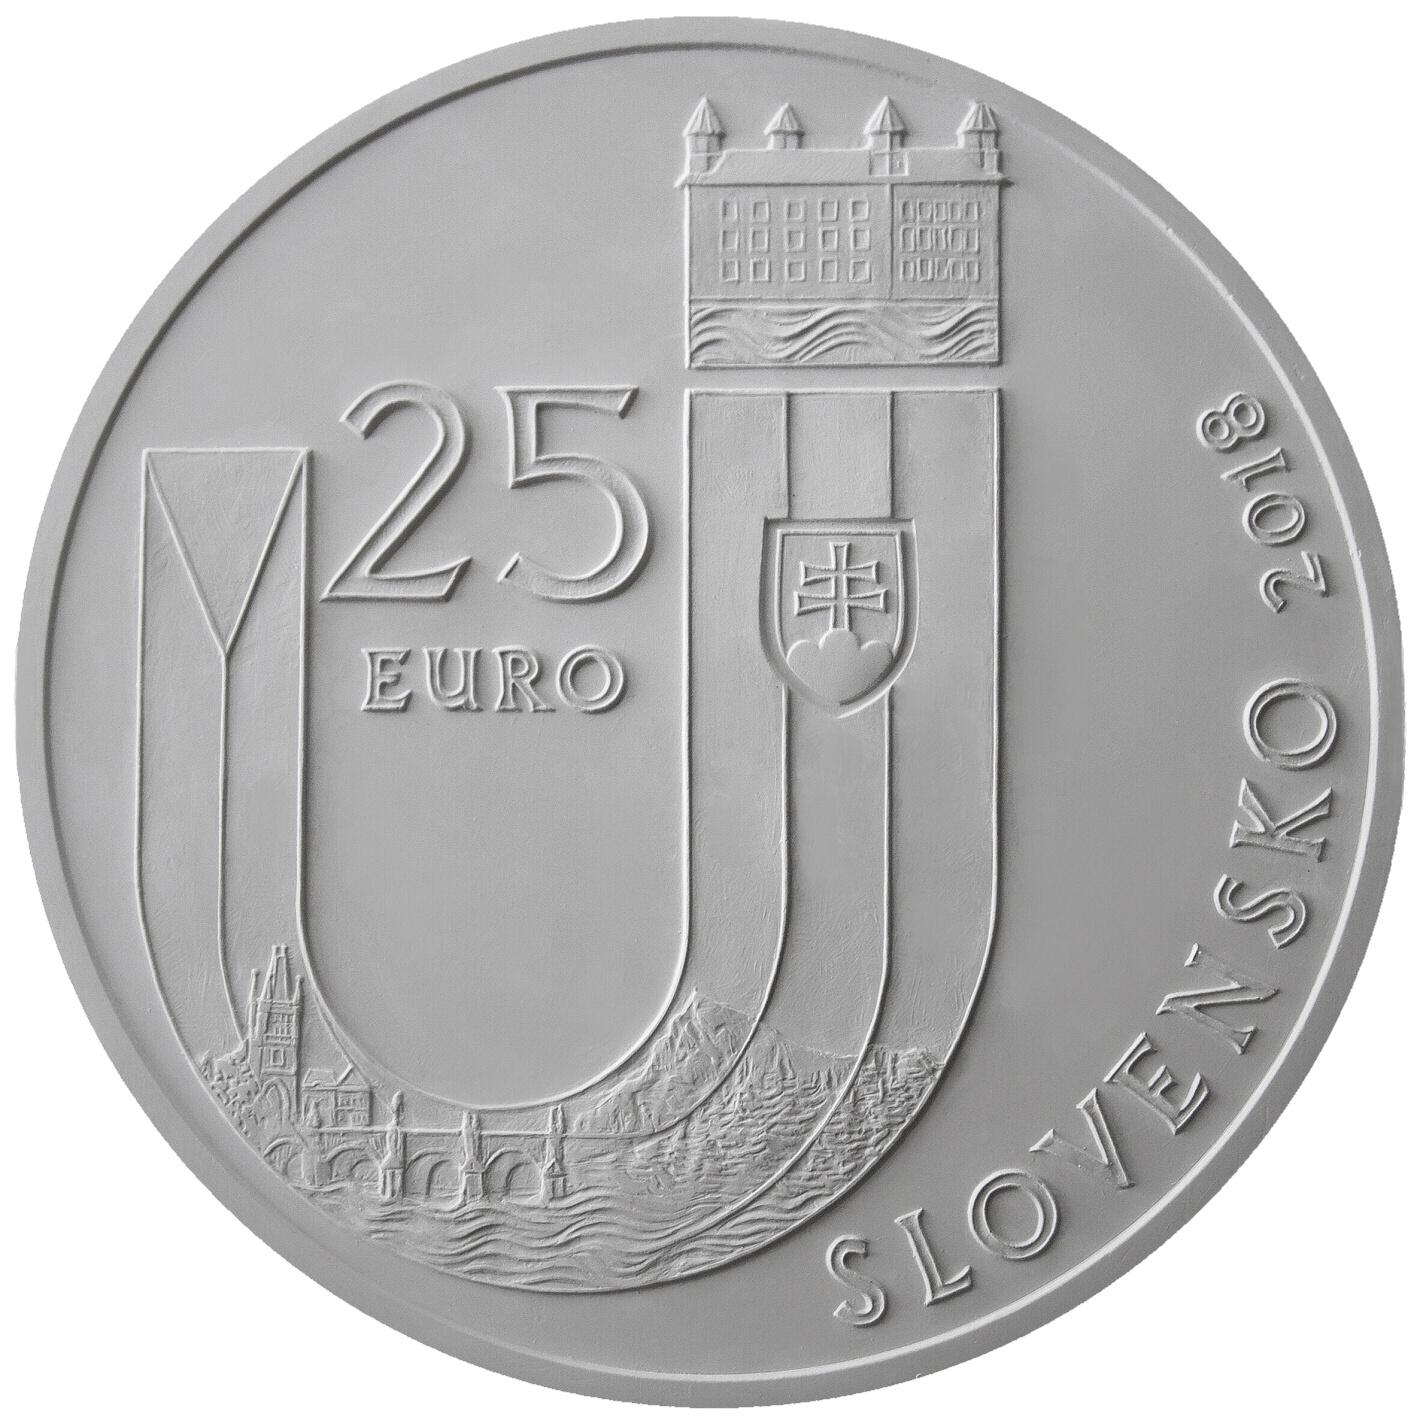 Reduced first prize and the design selected for the coin